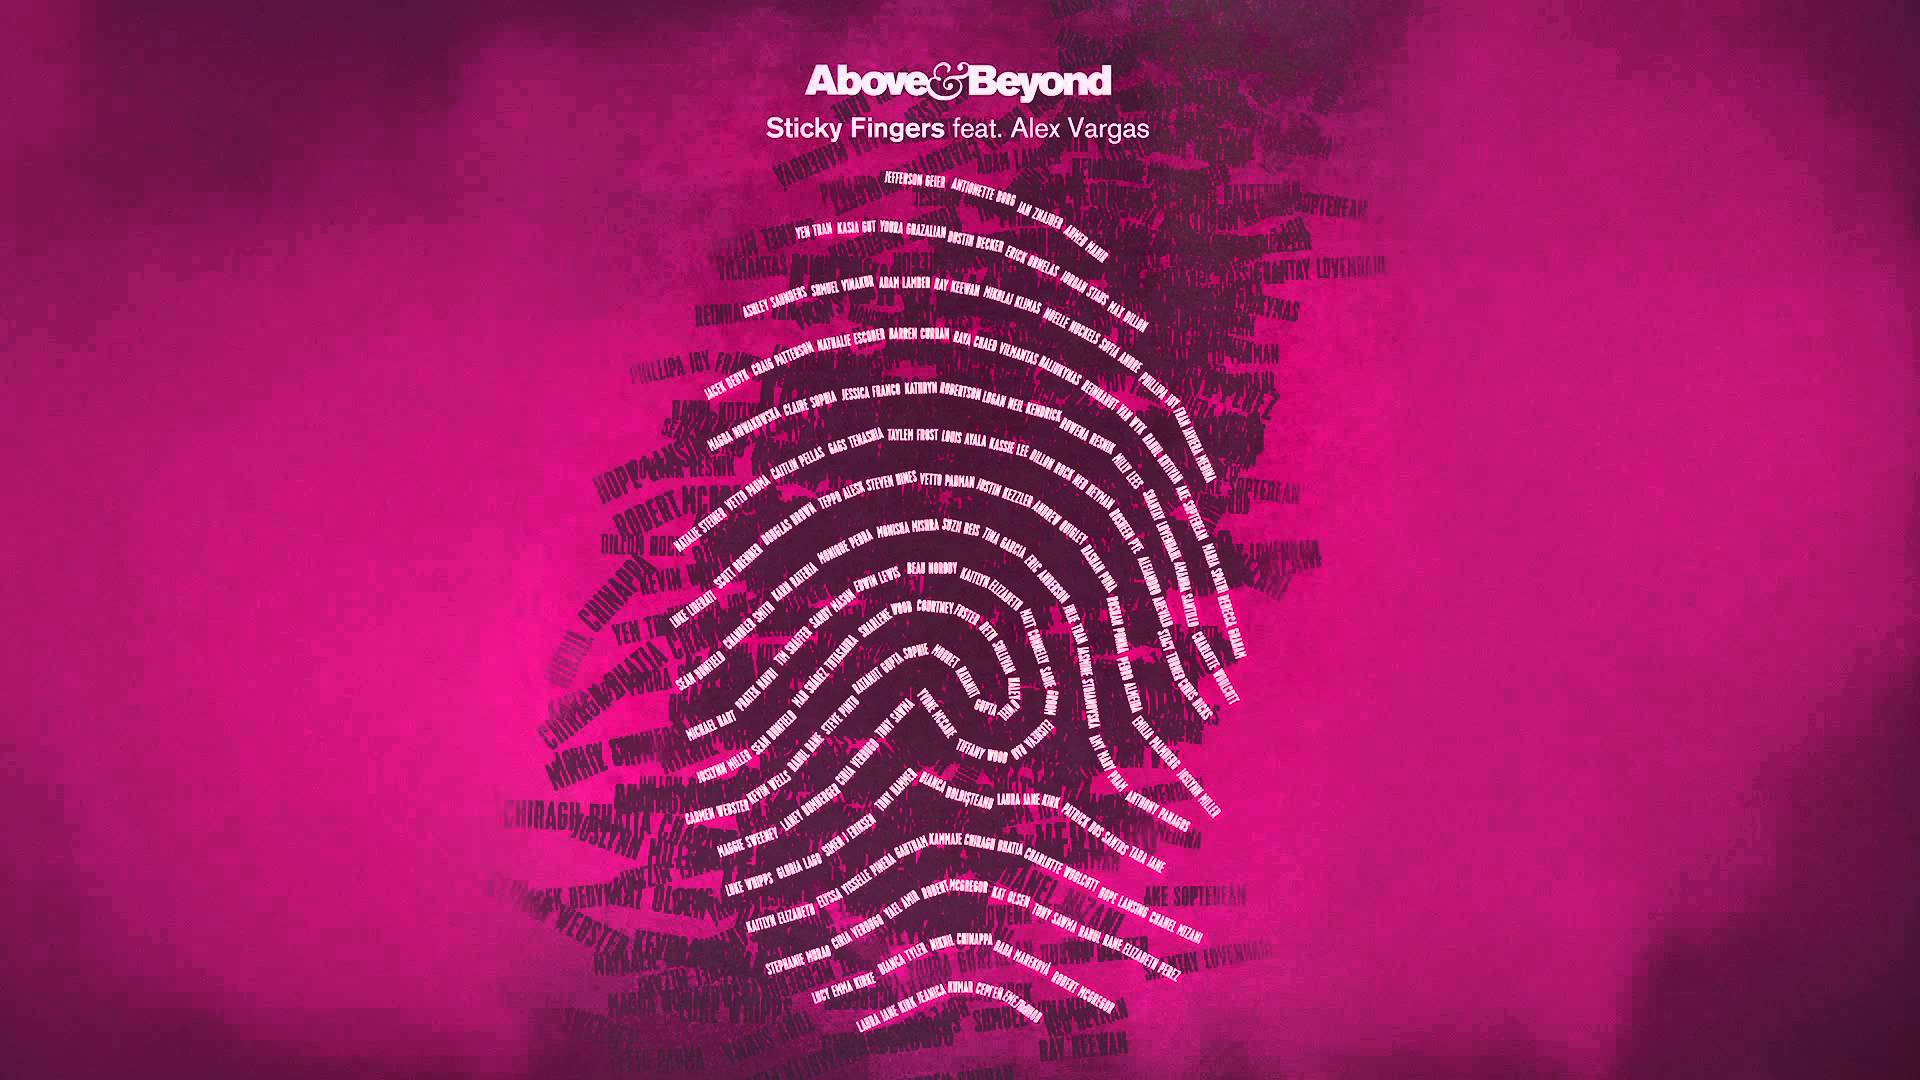 Above & Beyond - Sticky Fingers feat. Alex Vargas - YouTube